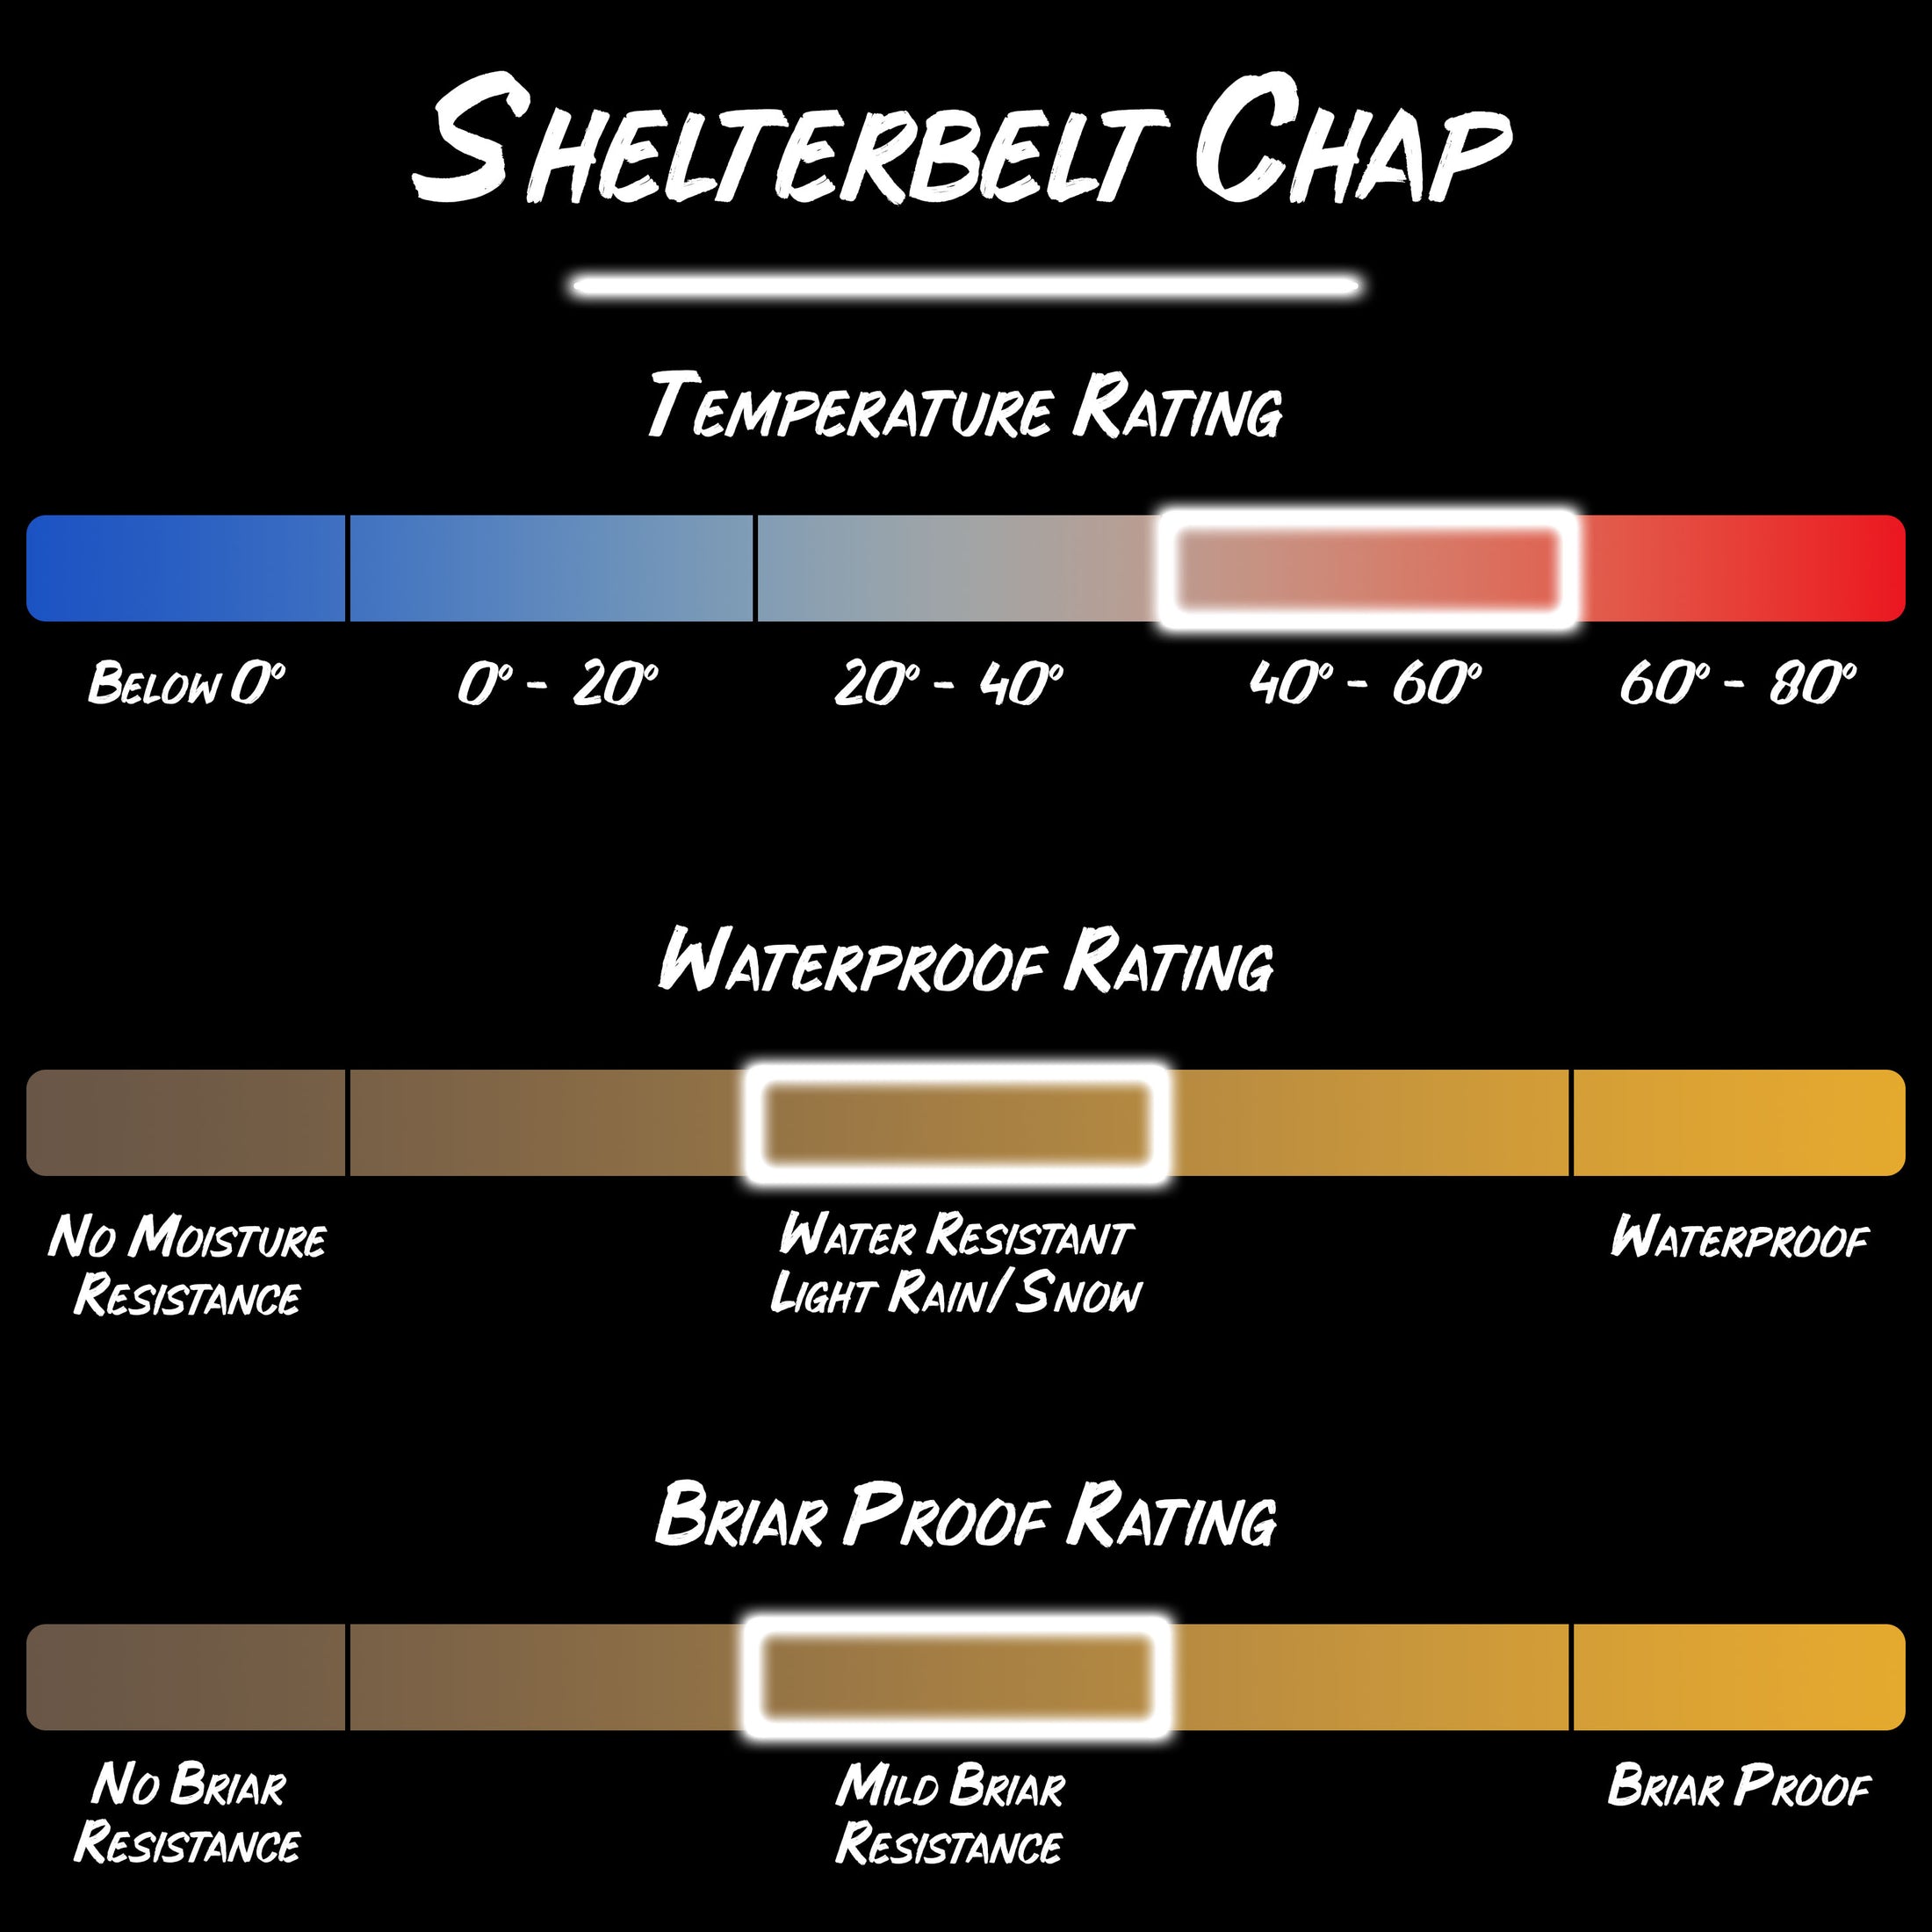 Gamehide shelterbelt upland hunting chap product specifications